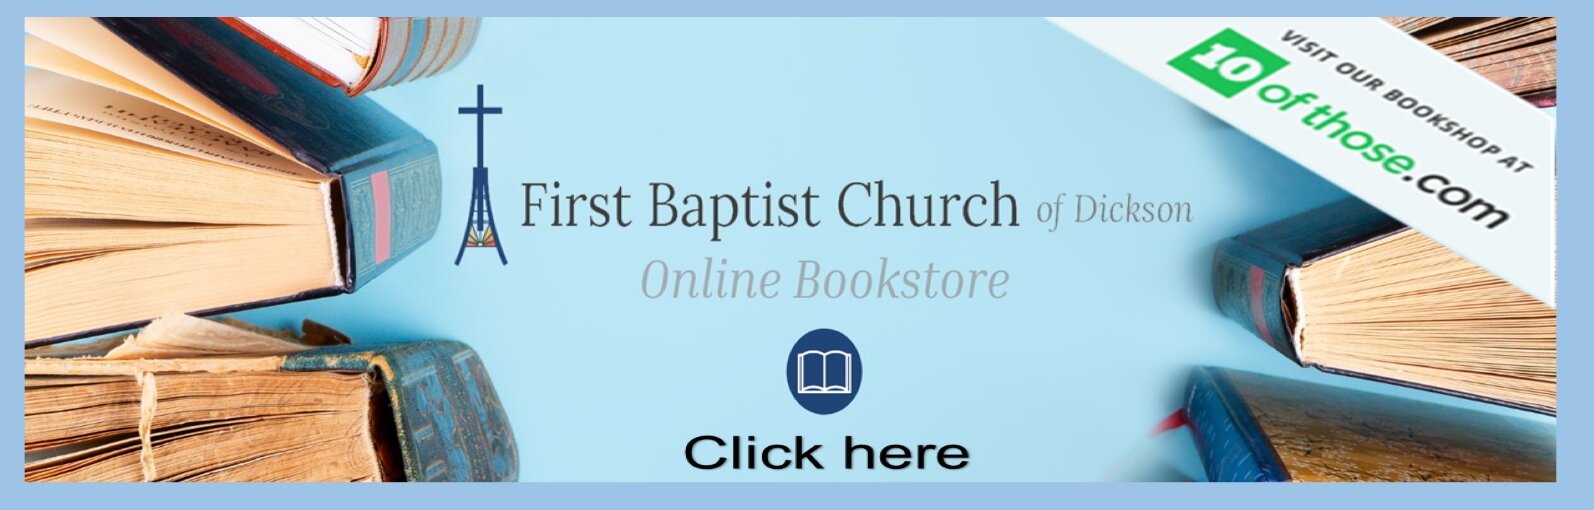 /images/r/fbc-bookstore-on-10-of-those-click-here-banner/c1594x510/fbc-bookstore-on-10-of-those-click-here-banner.jpg